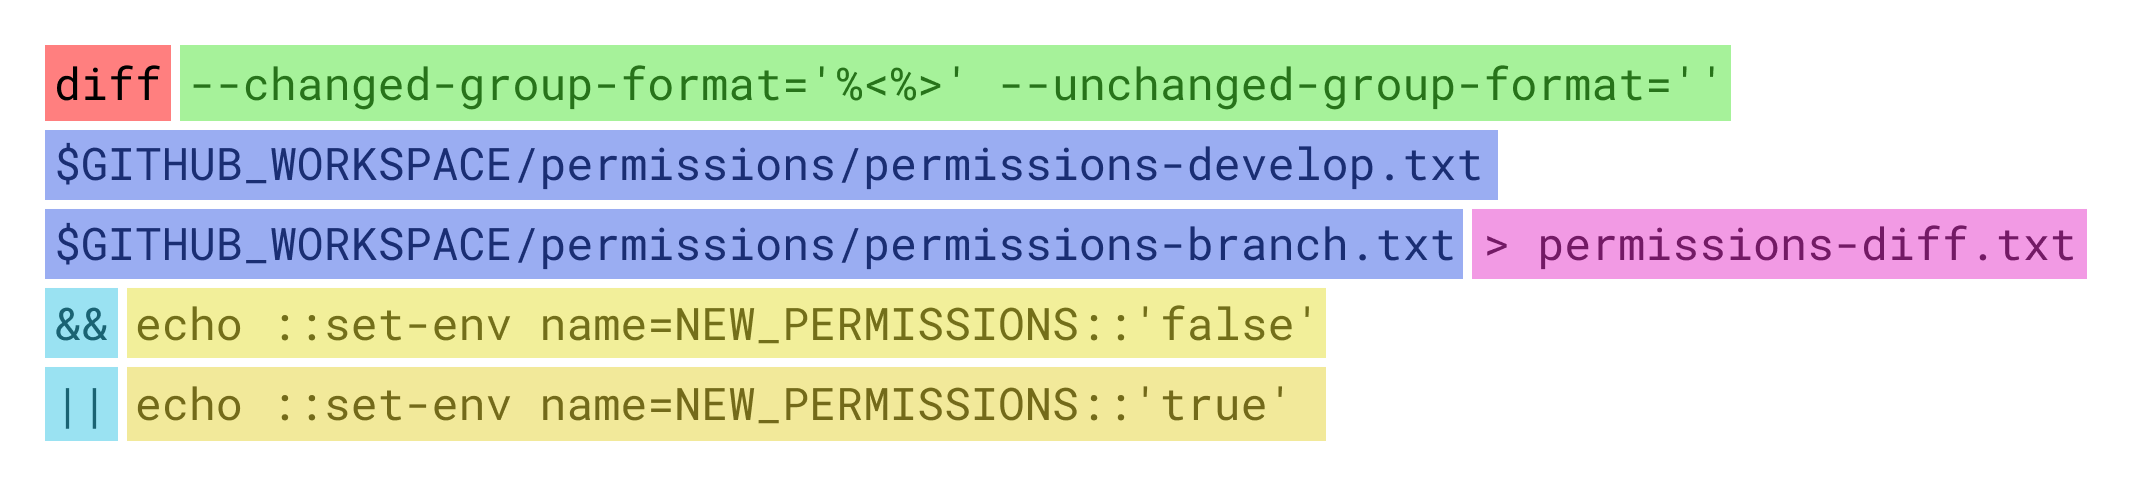 Workflow diff permissions